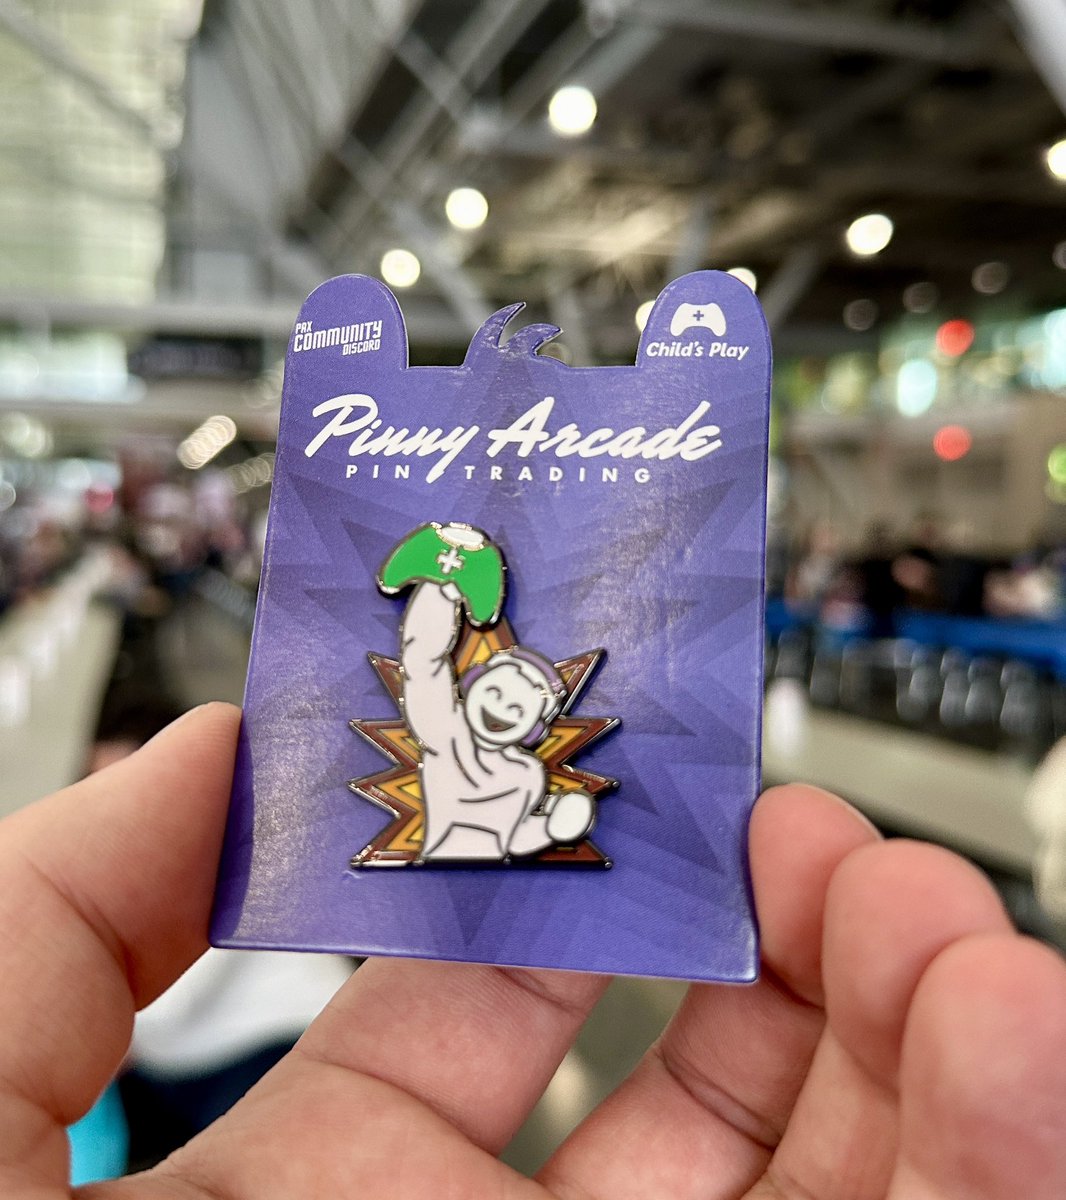 Our latest @pinny_arcade pin with @CPCharity has landed at #PAXEast! Get yours at the Child’s Play booth now!